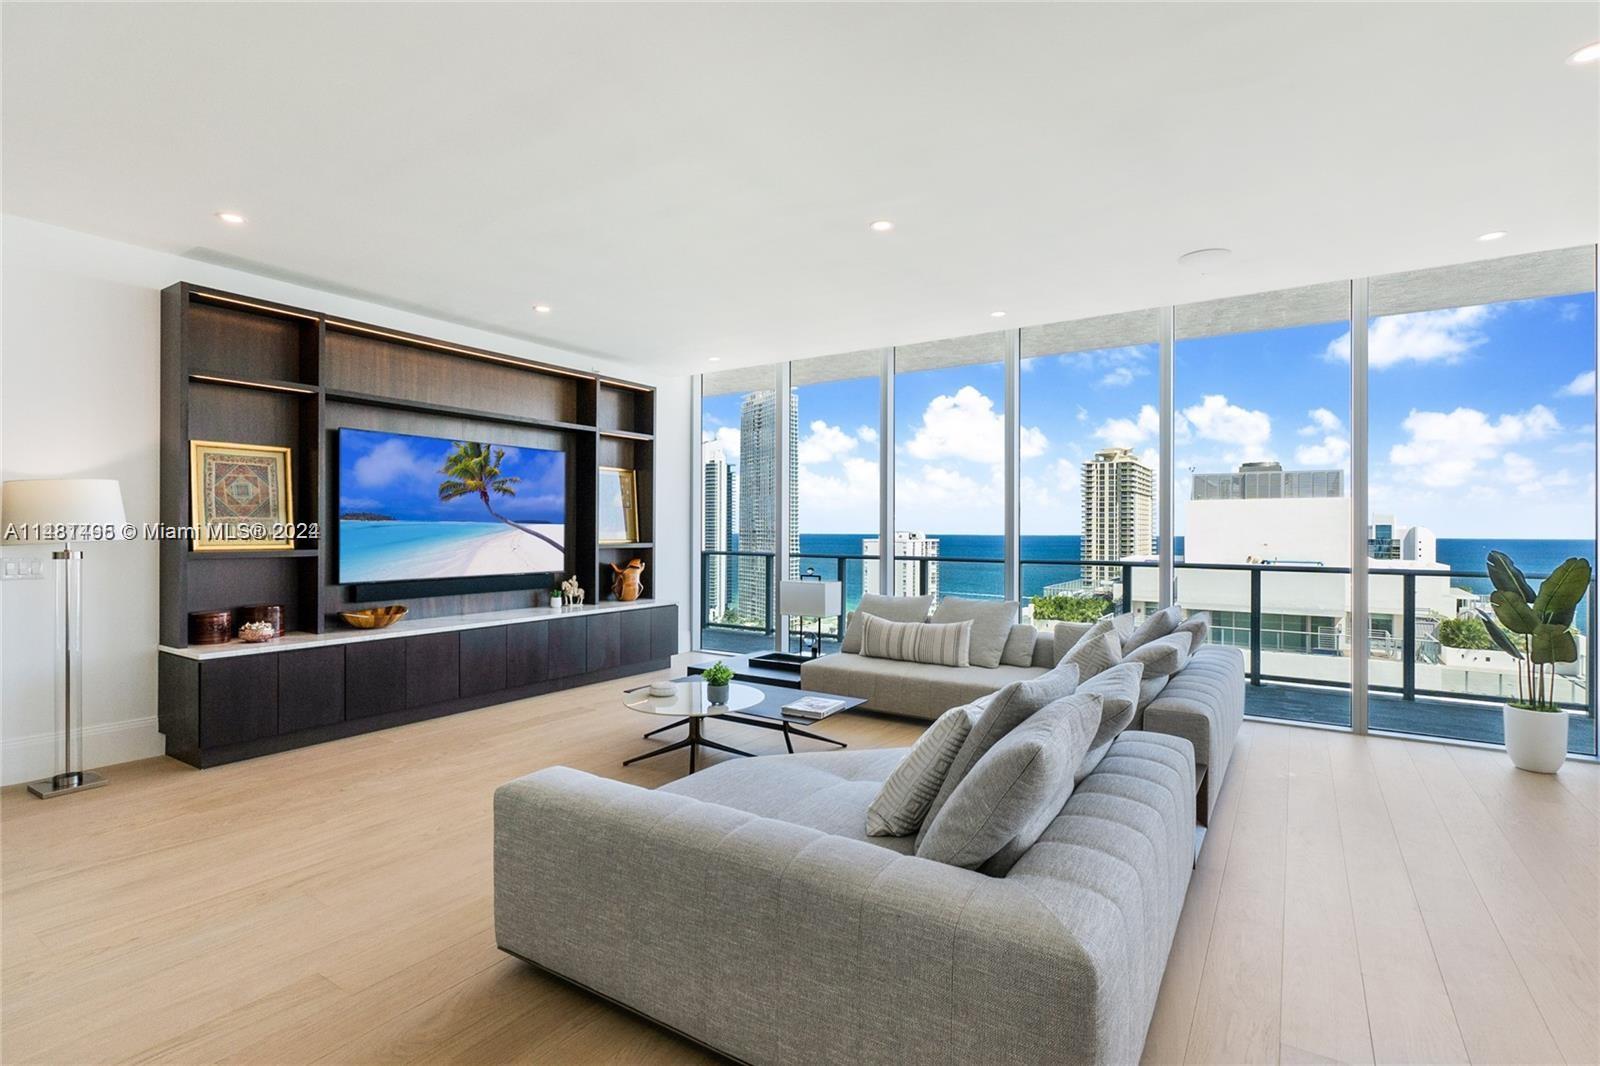 Welcome to the epitome of luxury living in Sunny Isles Beach! This magnificent condo boasts unparalleled elegance and sophistication, complemented by its exceptional private rooftop and private pool. You will be immediately captivated by the grandeur displayed throughout this home. Expansive floor-to-ceiling windows offer breathtaking views of the glistening ocean, intracoastal and city skyline.The state-of-the-art kitchen is a true chef's dream, with top of the line appliances, custom cabinetry, and a spacious island.  Parque Towers grants you access to an array of upscale amenities including heated pool, spa, jacuzzi, sauna, gym, kid's play room, club room, theater, game room, guest suites, lounge & dog park. This unit includes two garage parking spaces, two valet and & a storage unit.